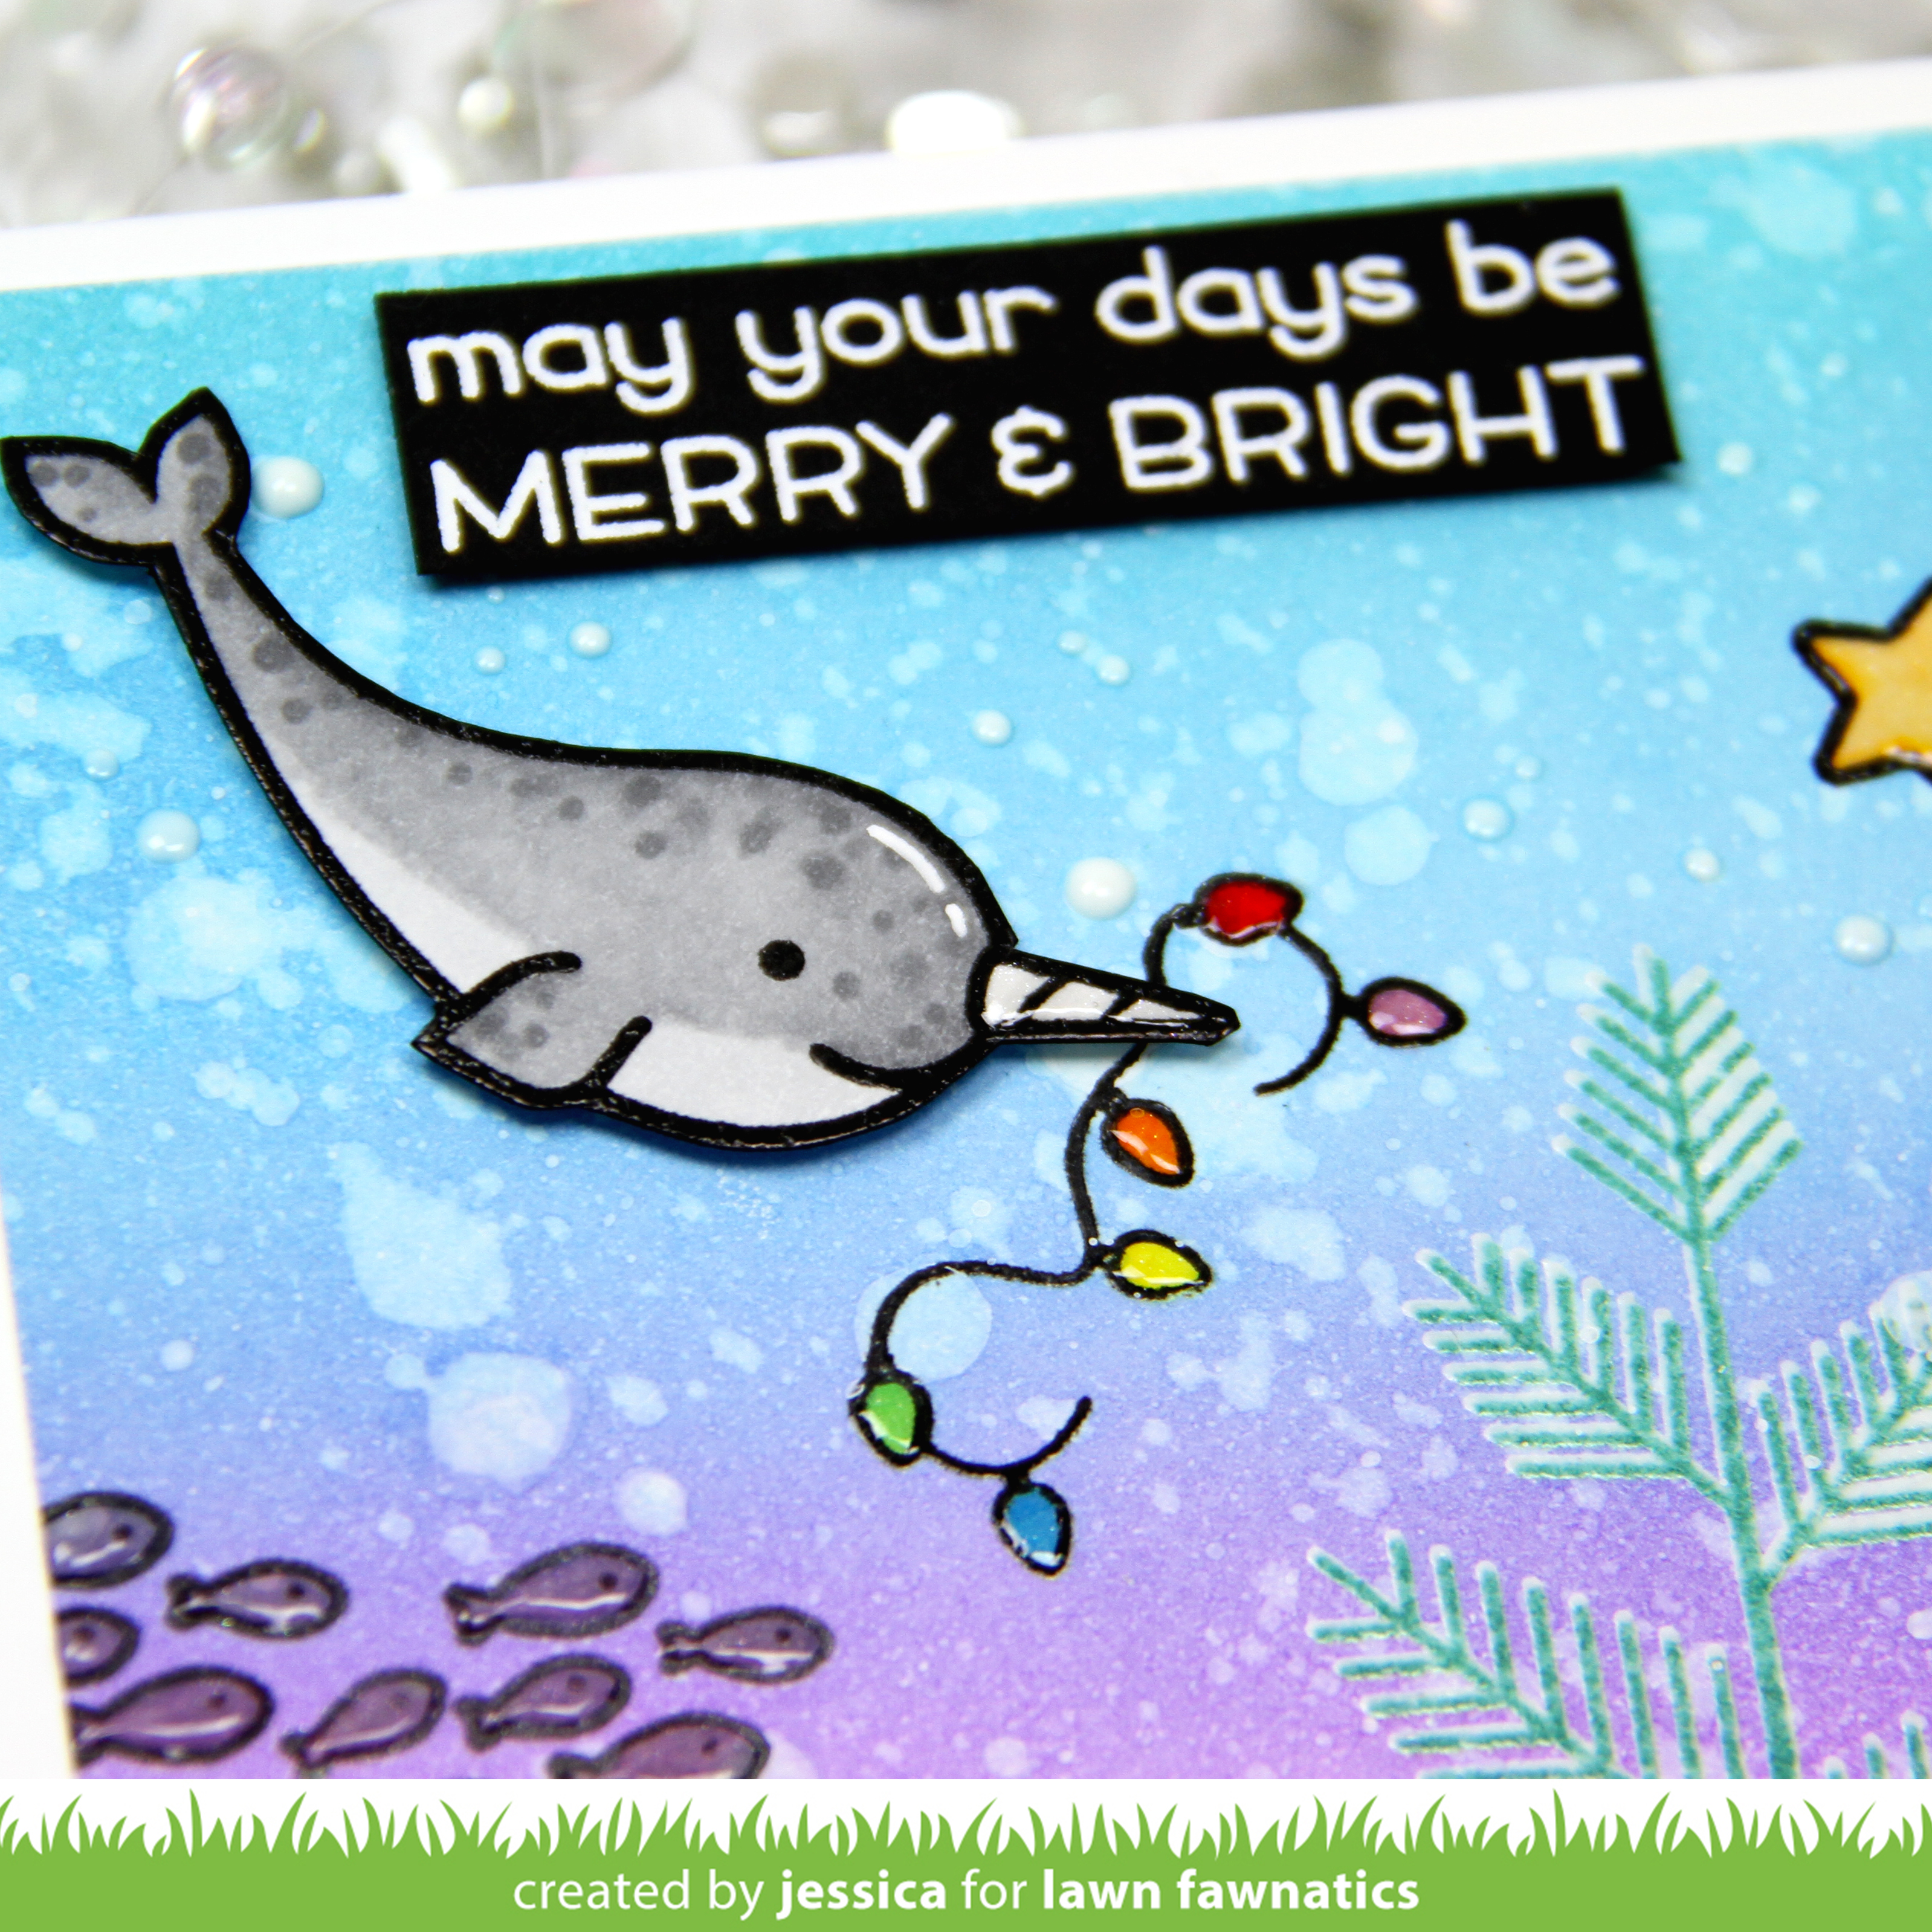 Merry and Bright by Jessica Frost-Ballas for Lawn Fawnatics